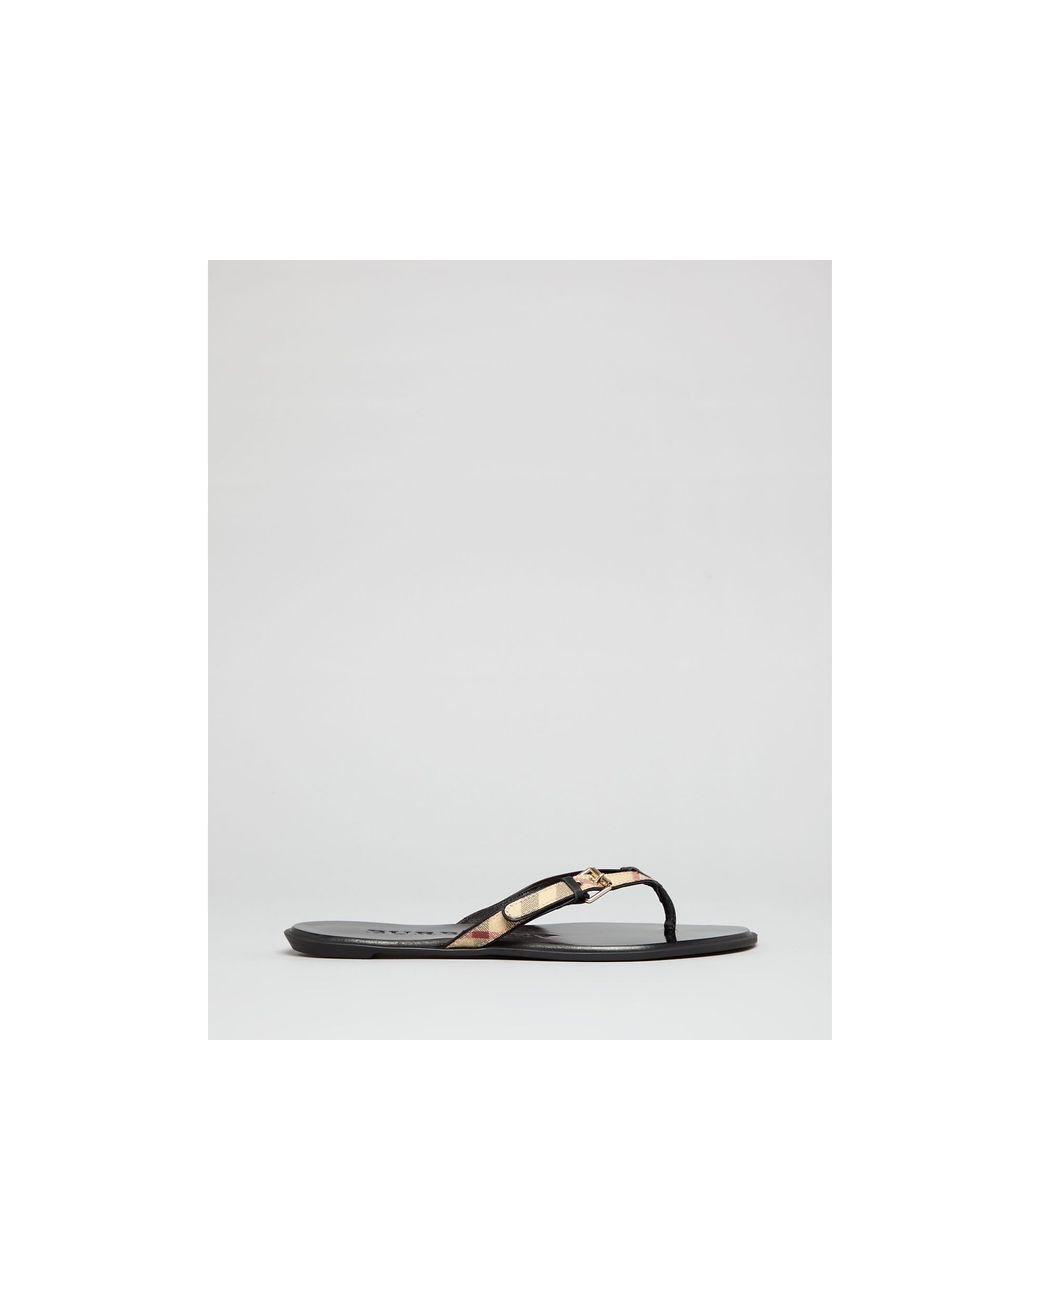 Burberry Flip Flop Sandals Parsons Check Thong in Metallic | Lyst